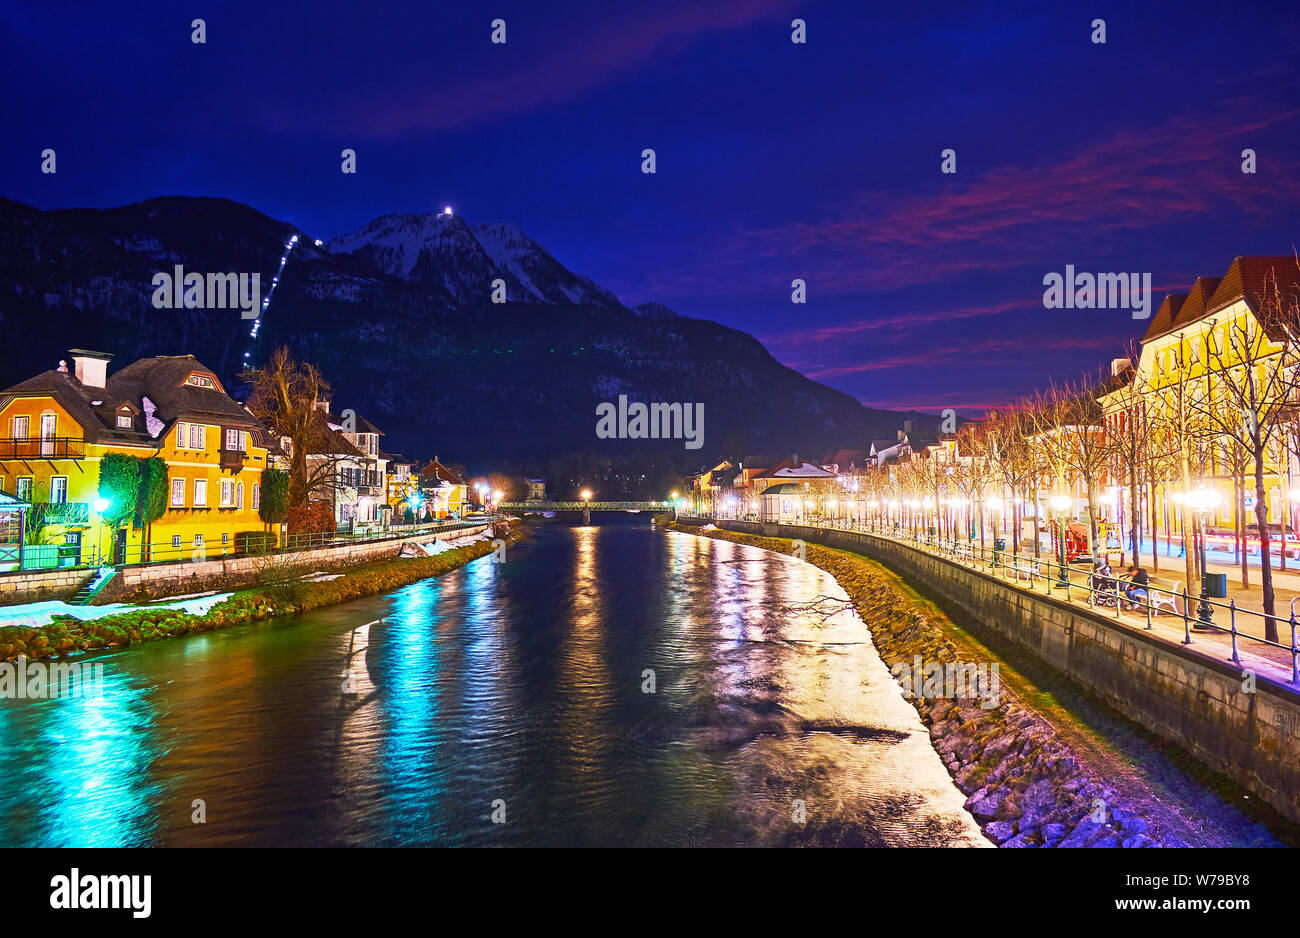 The twilight cityscape of Bad Ischl with illuminated banks of Traun river and dark silhouette of Mount Katrin on background, Austria Stock Photo